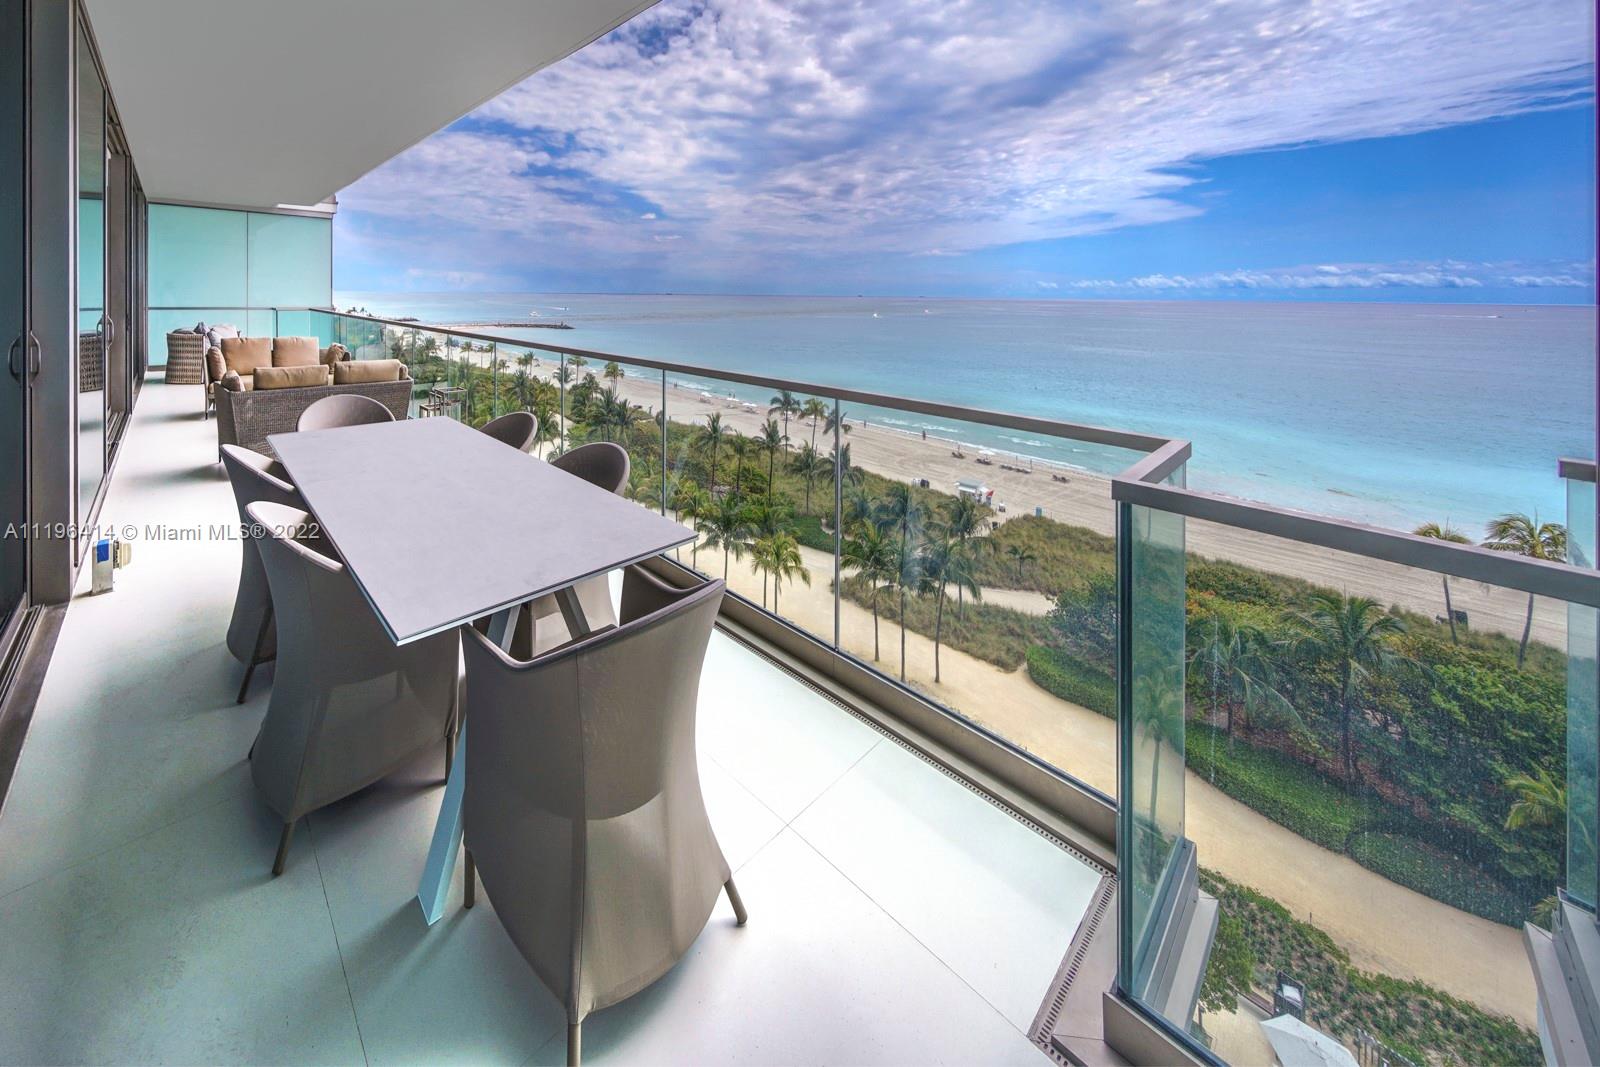 Custom built Turn-key oceanfront residence at Bal Harbour most sophisticated building Oceana.  Direct ocean front. This unit was meticulously designed with the finest materials sourced from all over the world.  The floor plan was completely customized and is the only one of its kind at Oceana. Features 3 Bedroom/4Bathroom Plus Den, New gourmet kitchen, 650 Bottle Wine Cellar, Wood Millwork covering the entire apartment,  private elevator entry, floor-to-ceiling sliding doors that open up to a large oceanfront terrace. Oceana offers an exquisite lifestyle with resort-style amenities including Olympic-style pool, world-class spa, tennis courts, restaurant, 24-hour concierge services and security.